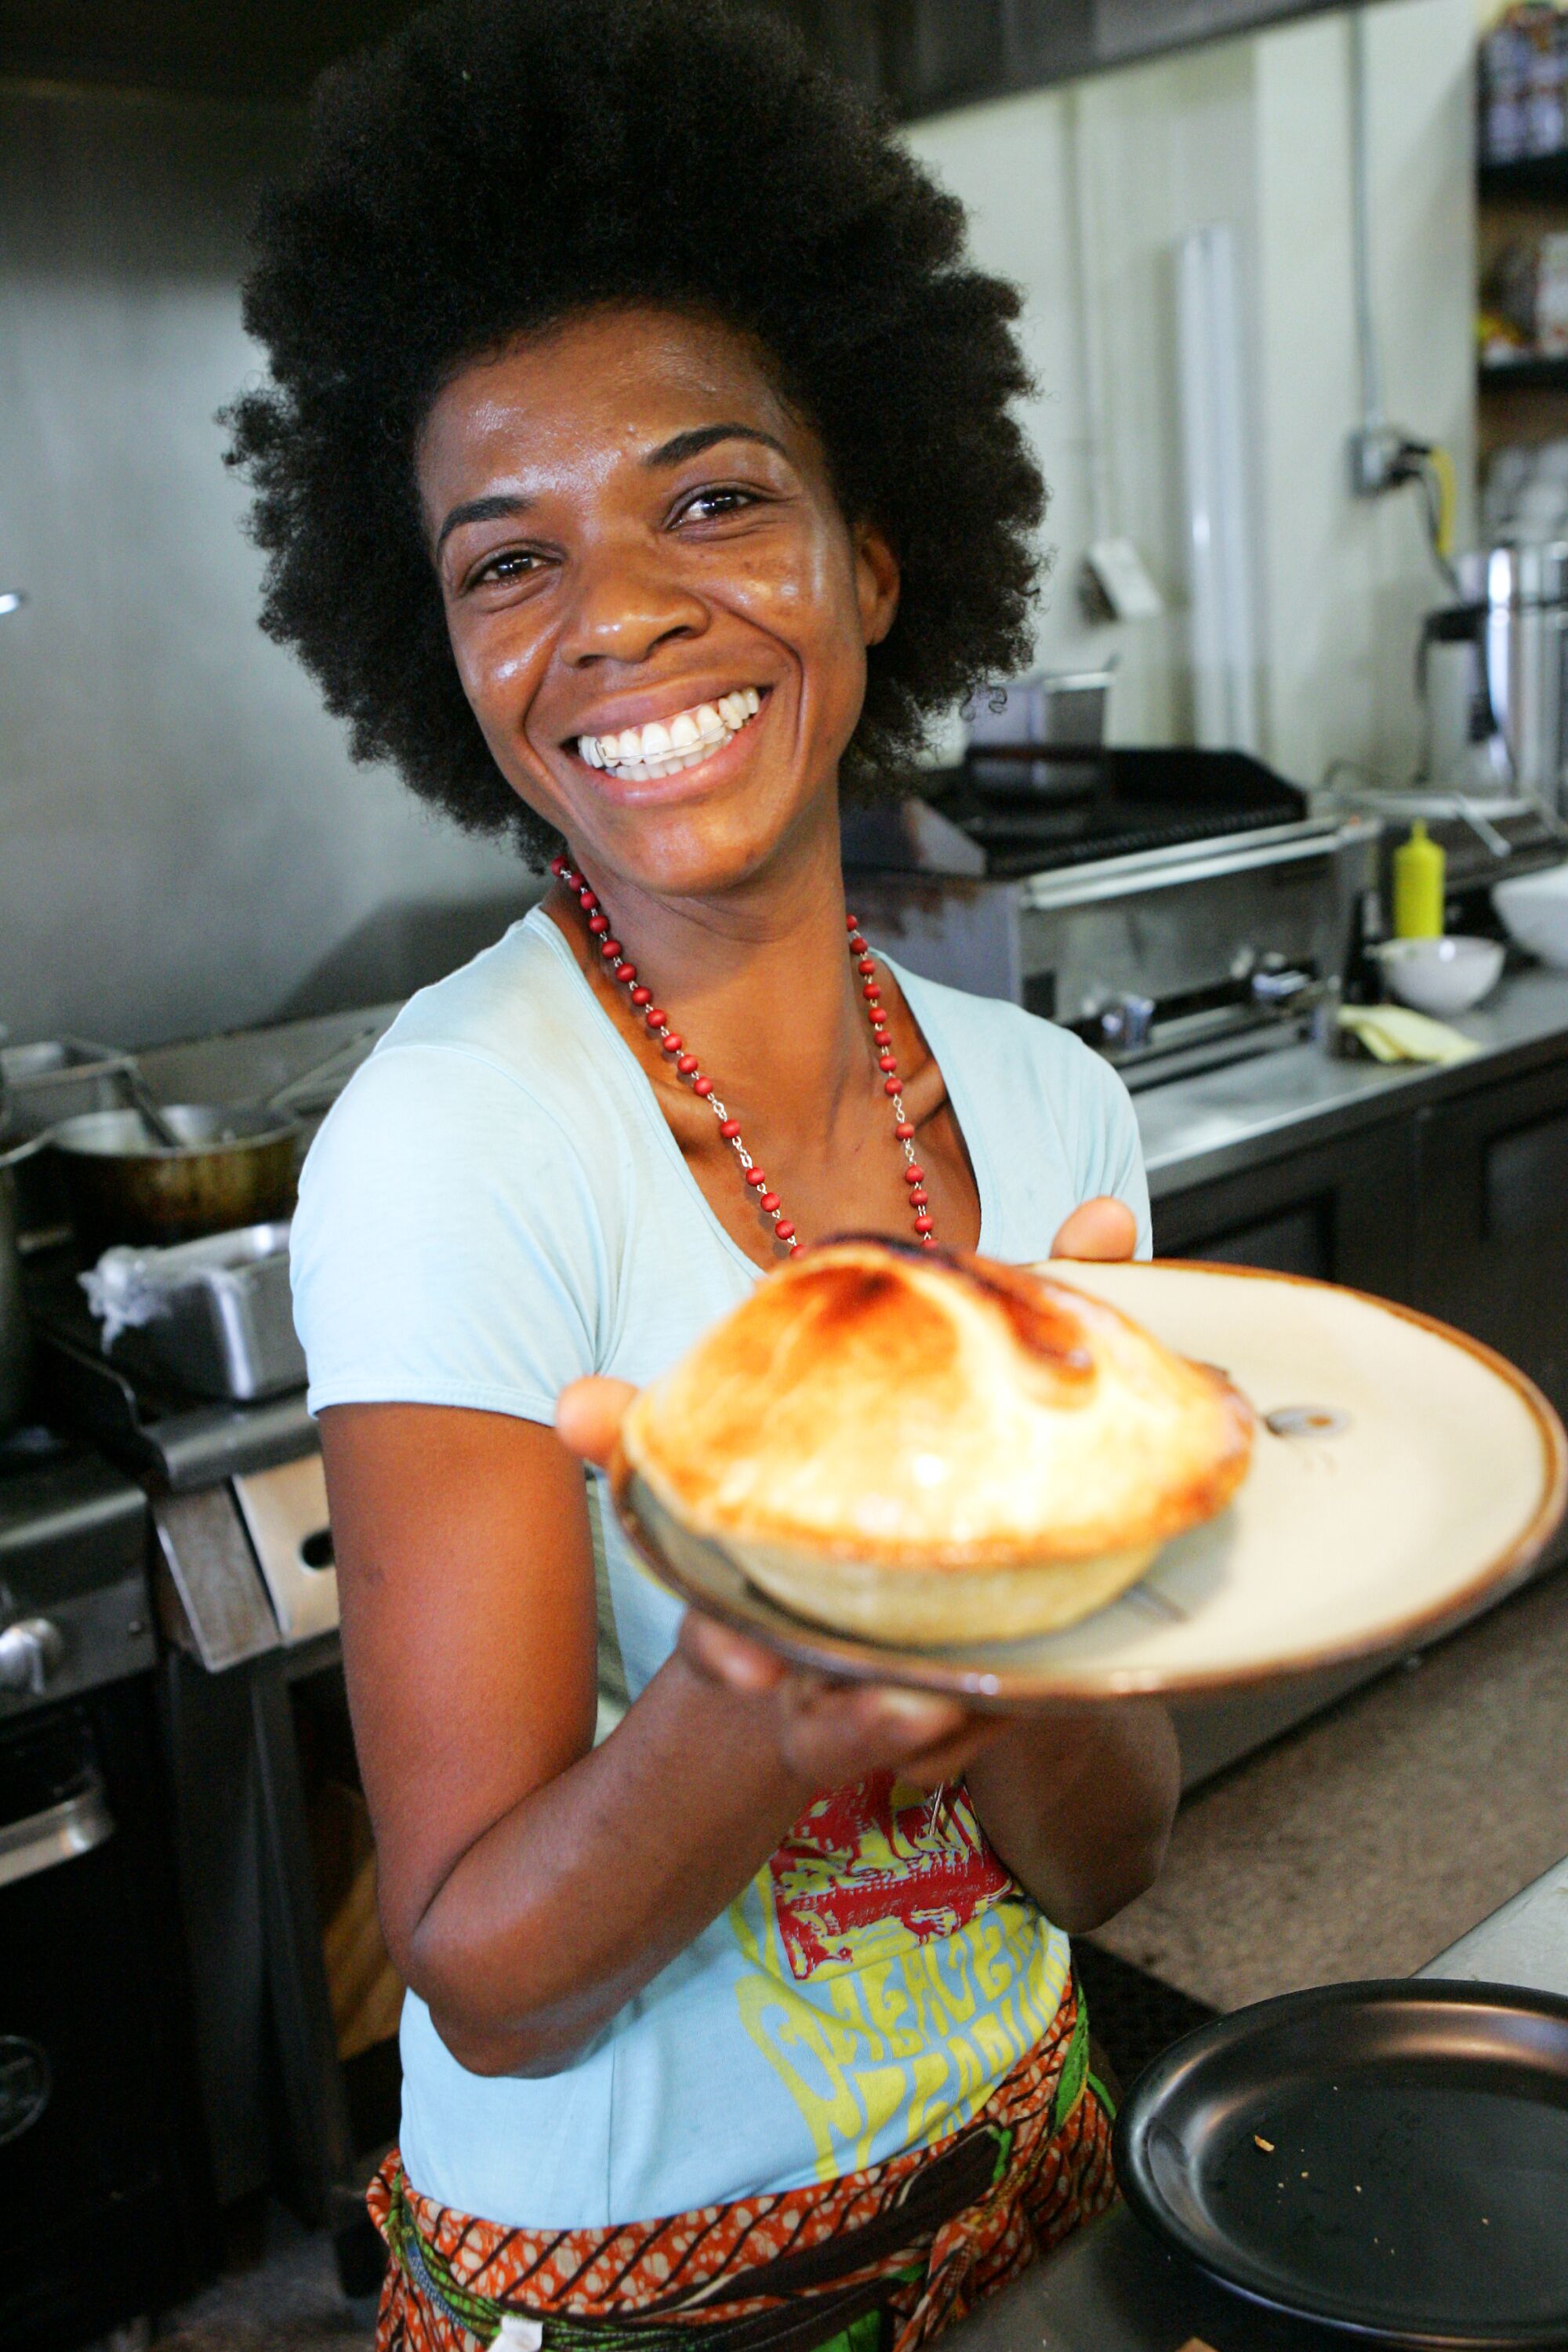 A smiling woman in a restaurant kitchen holds up a chicken pot pie on a plate.